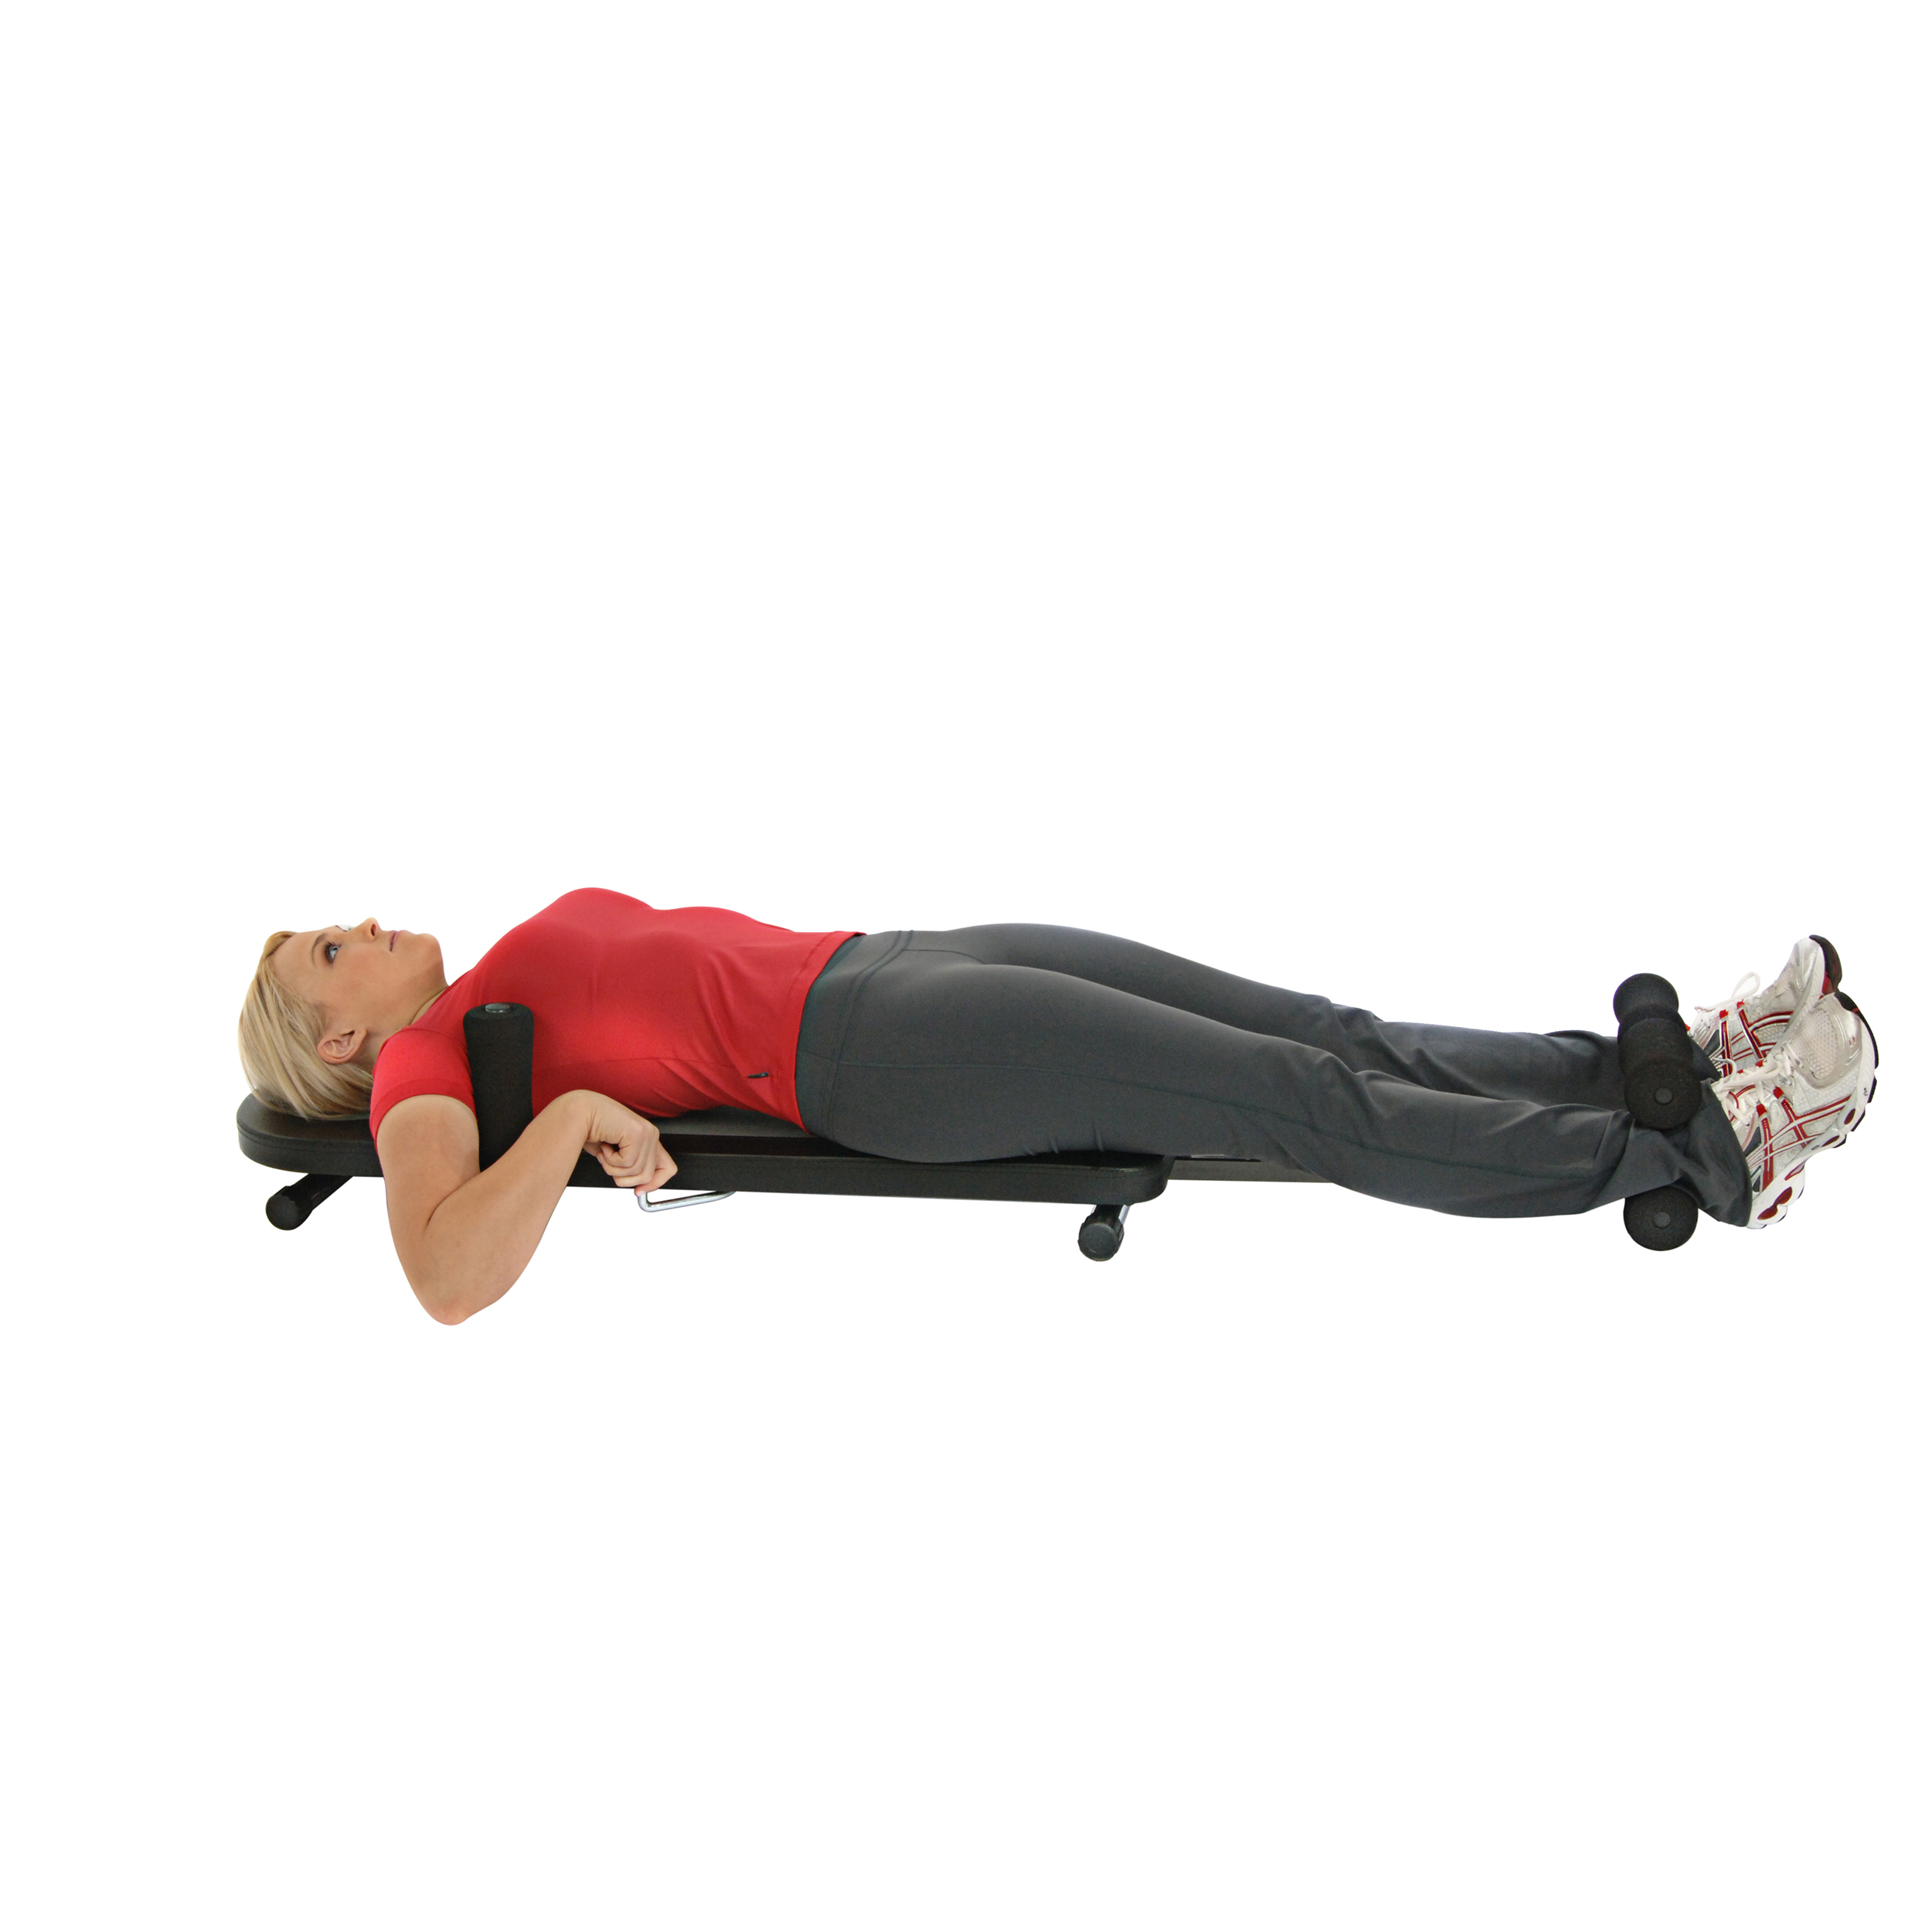 Back Stretching Equipment: How Do They Work?